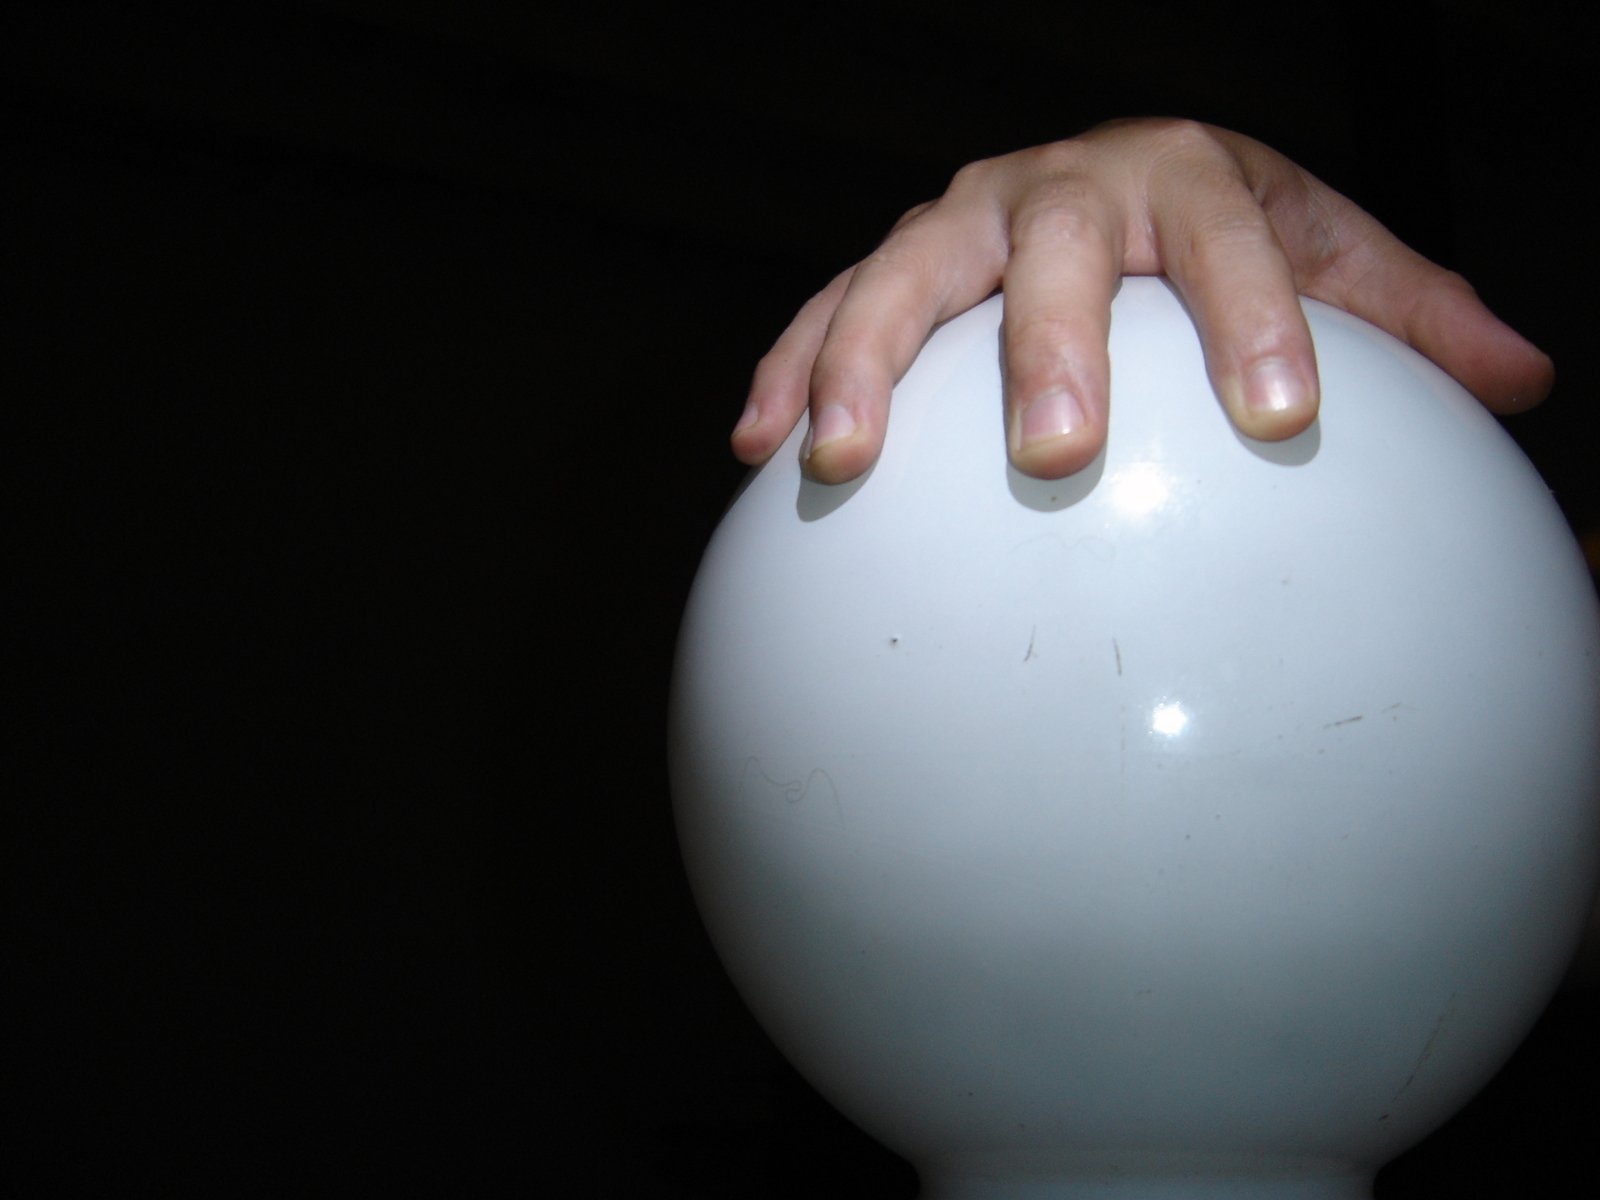 a person's hands on a large ball in the dark